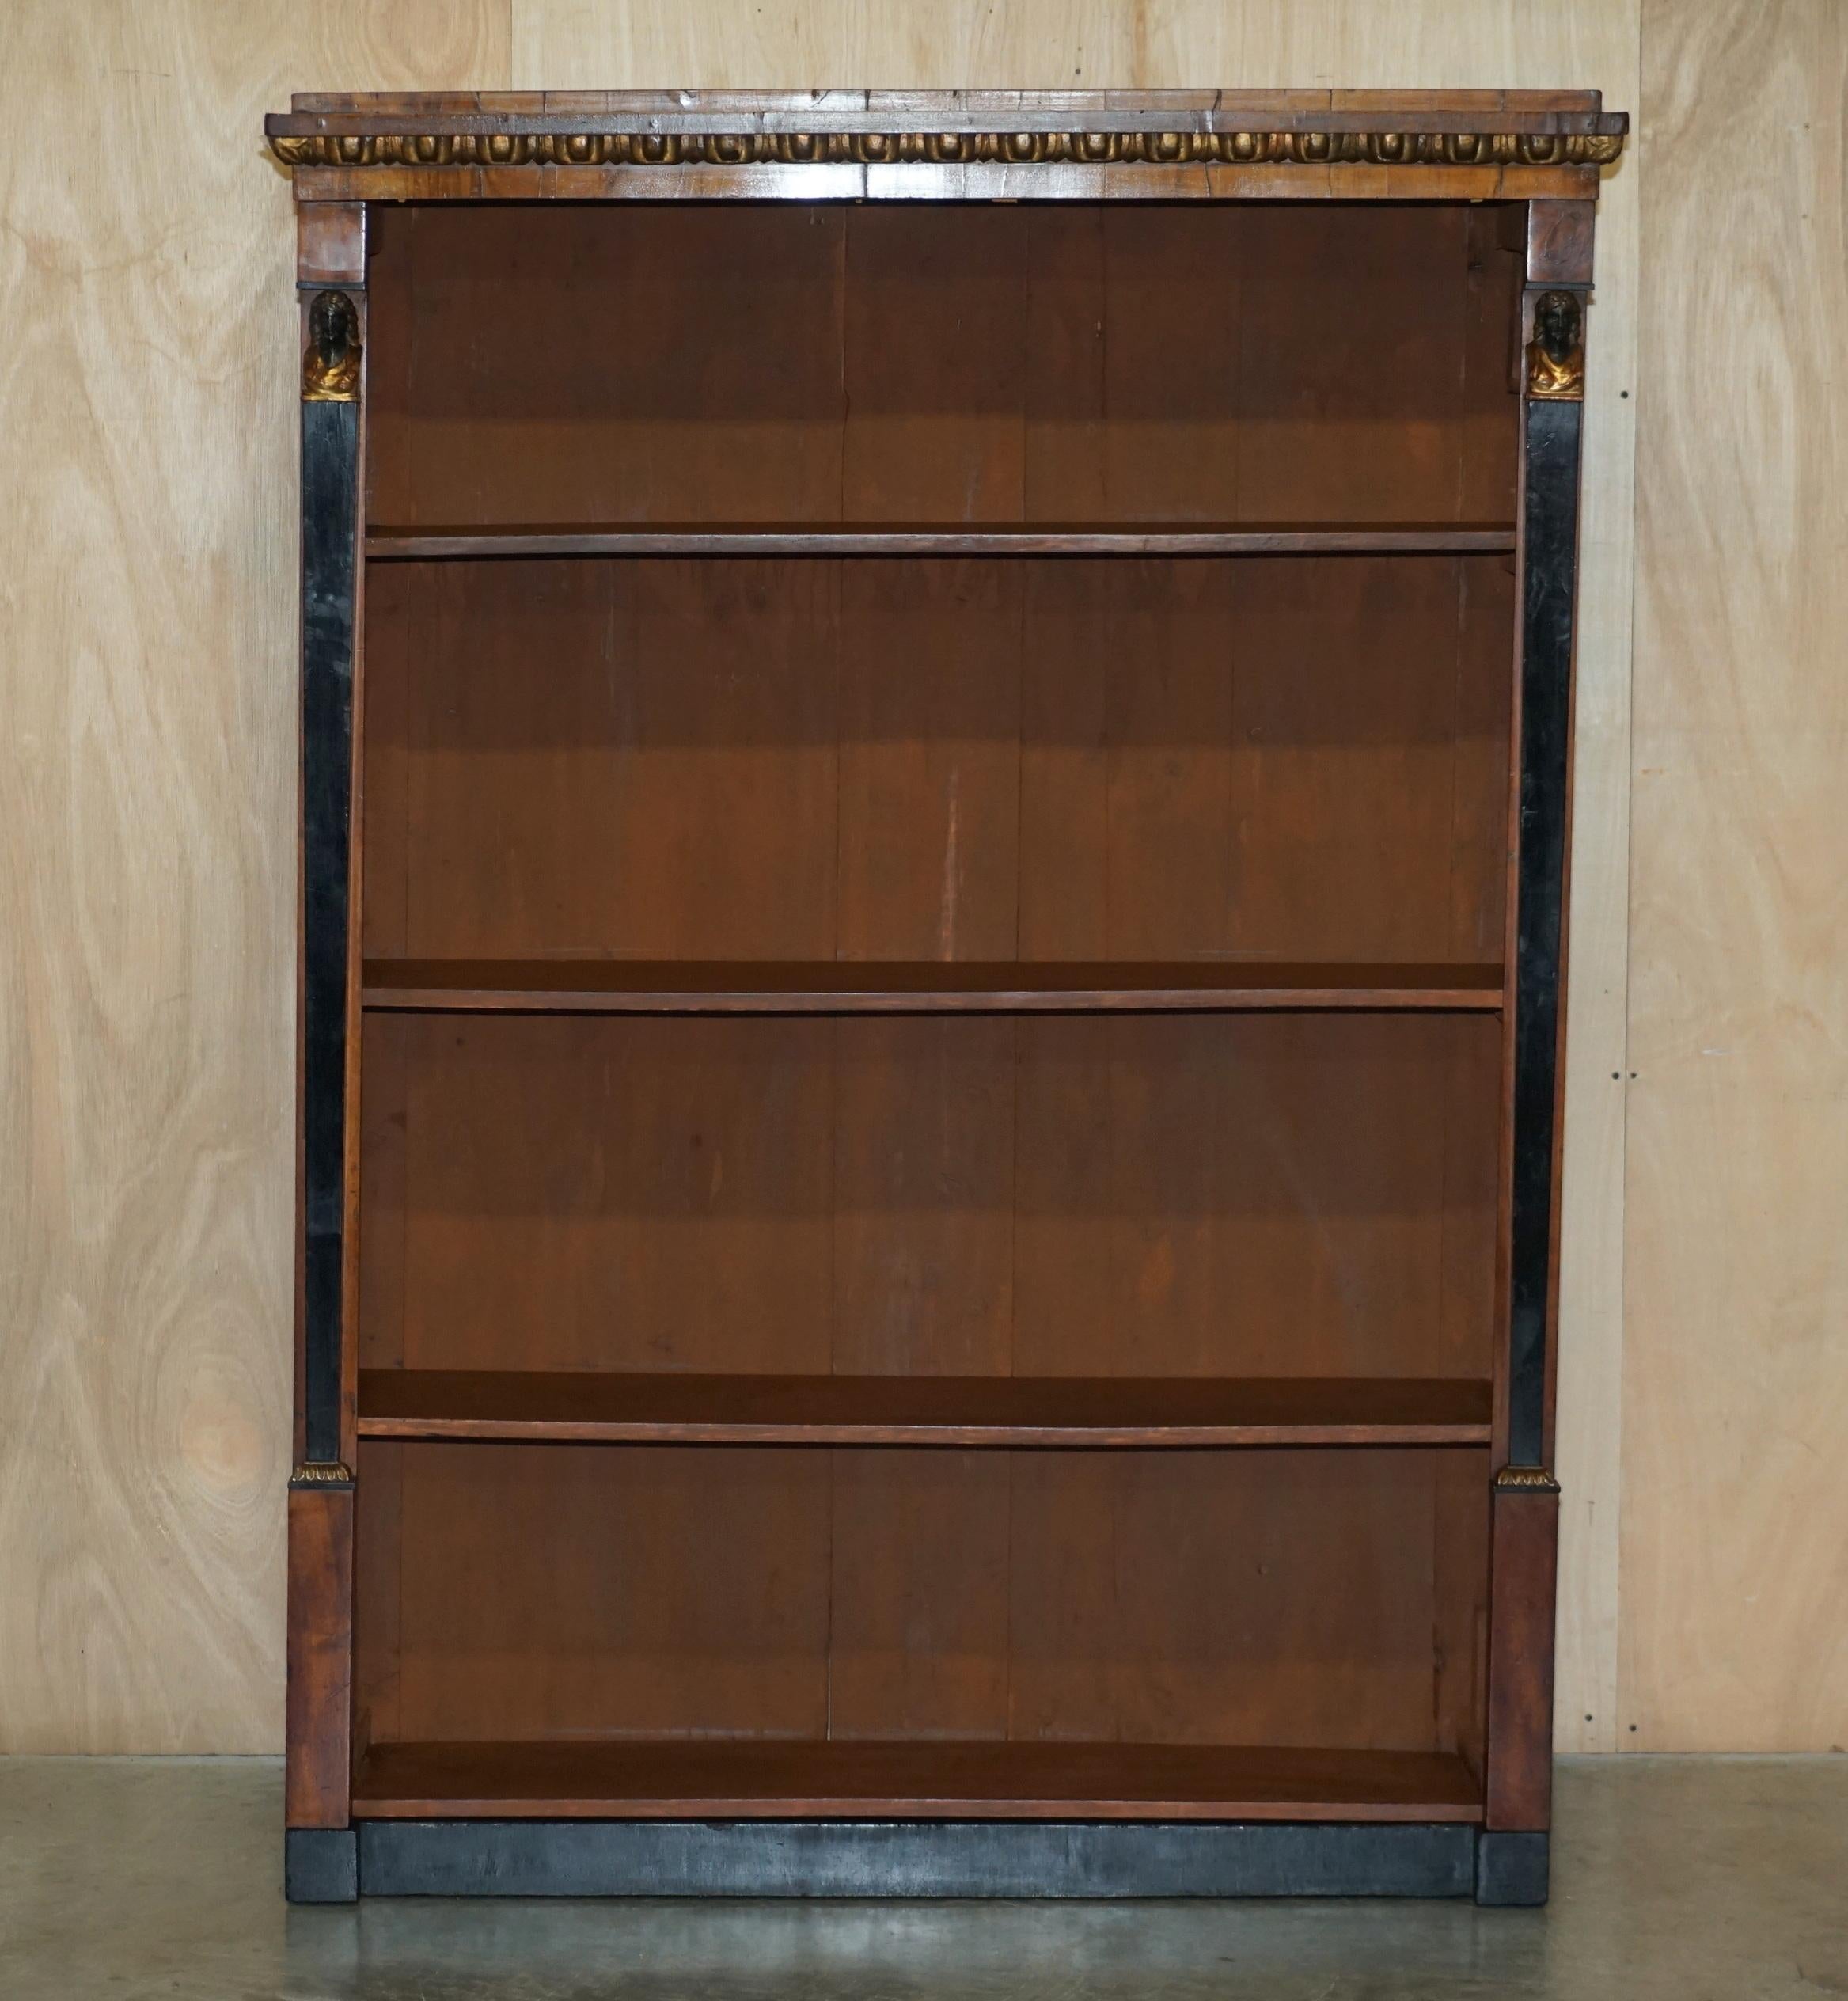 We are delighted to offer for sale this lovely Egyptian Revival, Biedermeier style large open library bookcase in Walnut 

A very well made and decorative library bookcases, this is a very good sized piece, its deeper than normal, the shelves are